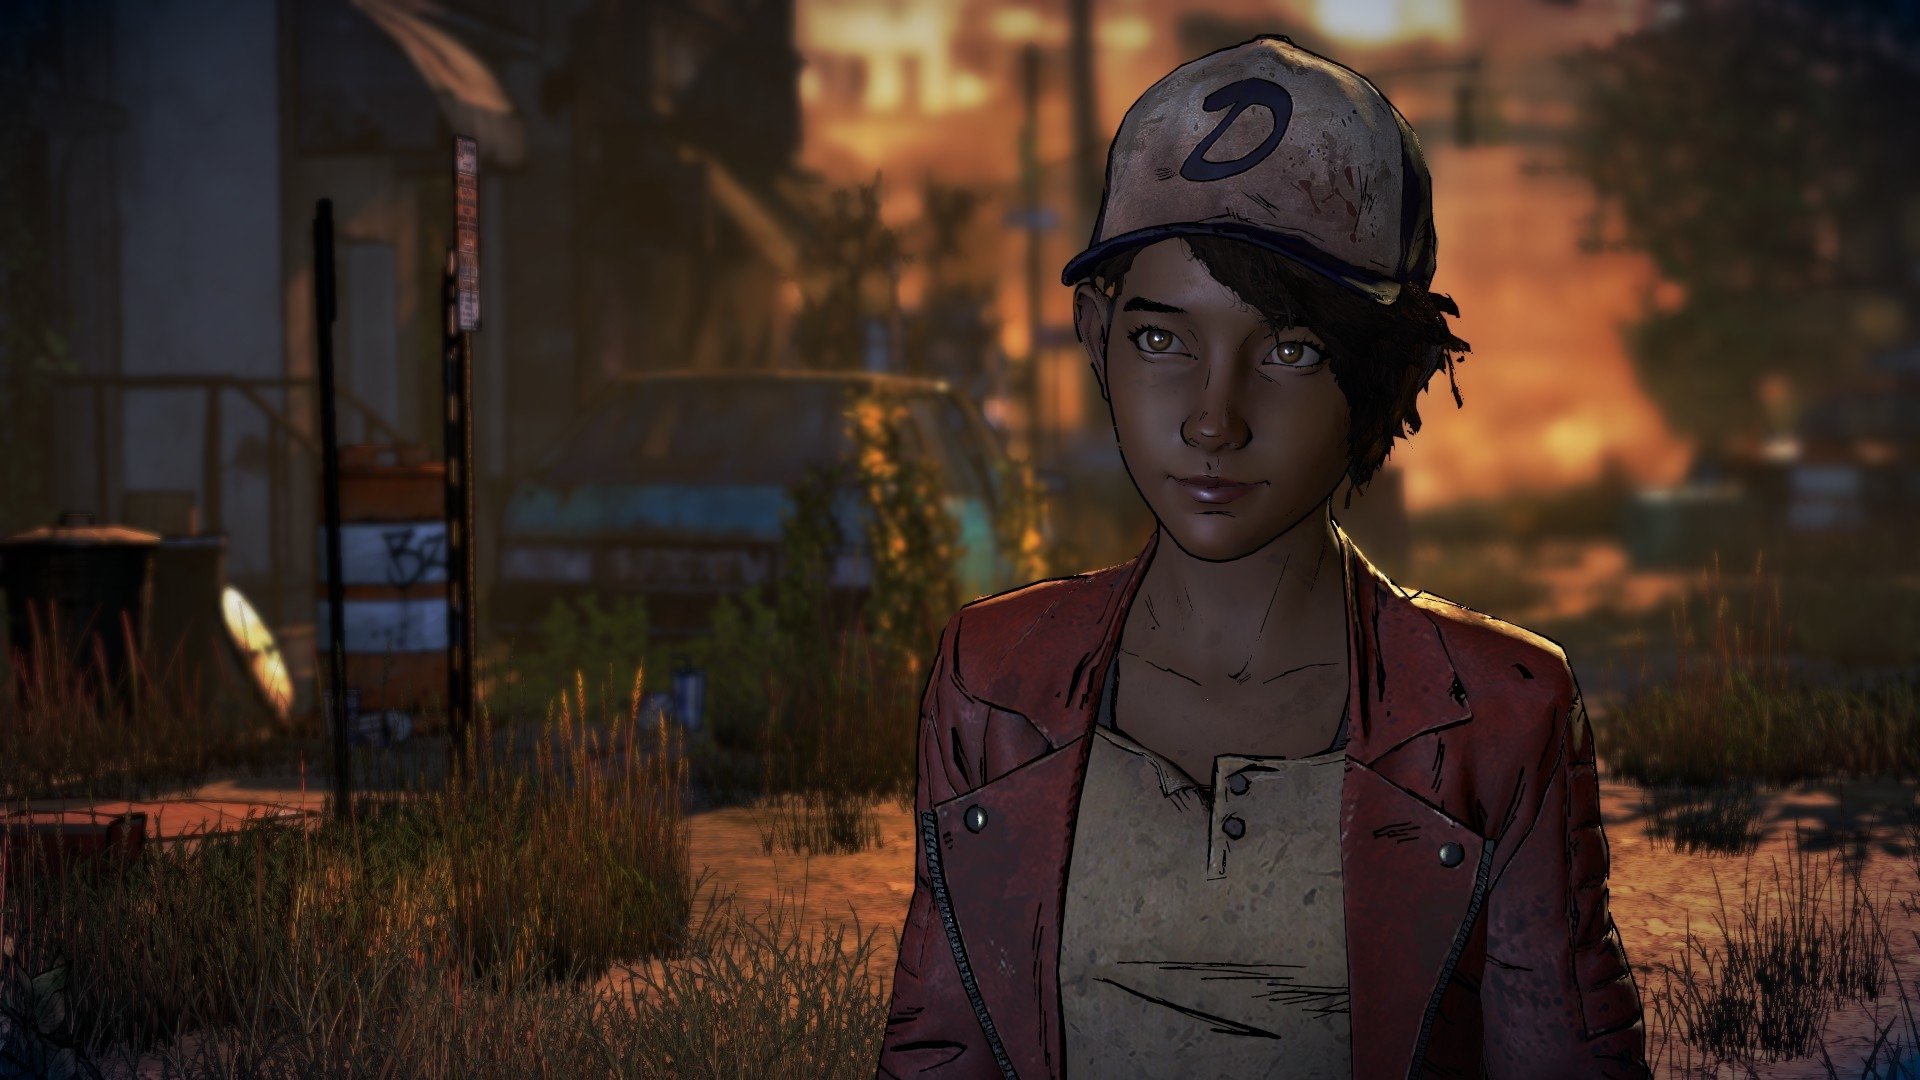 Clementine The Walking Dead HD Wallpaper Background Image